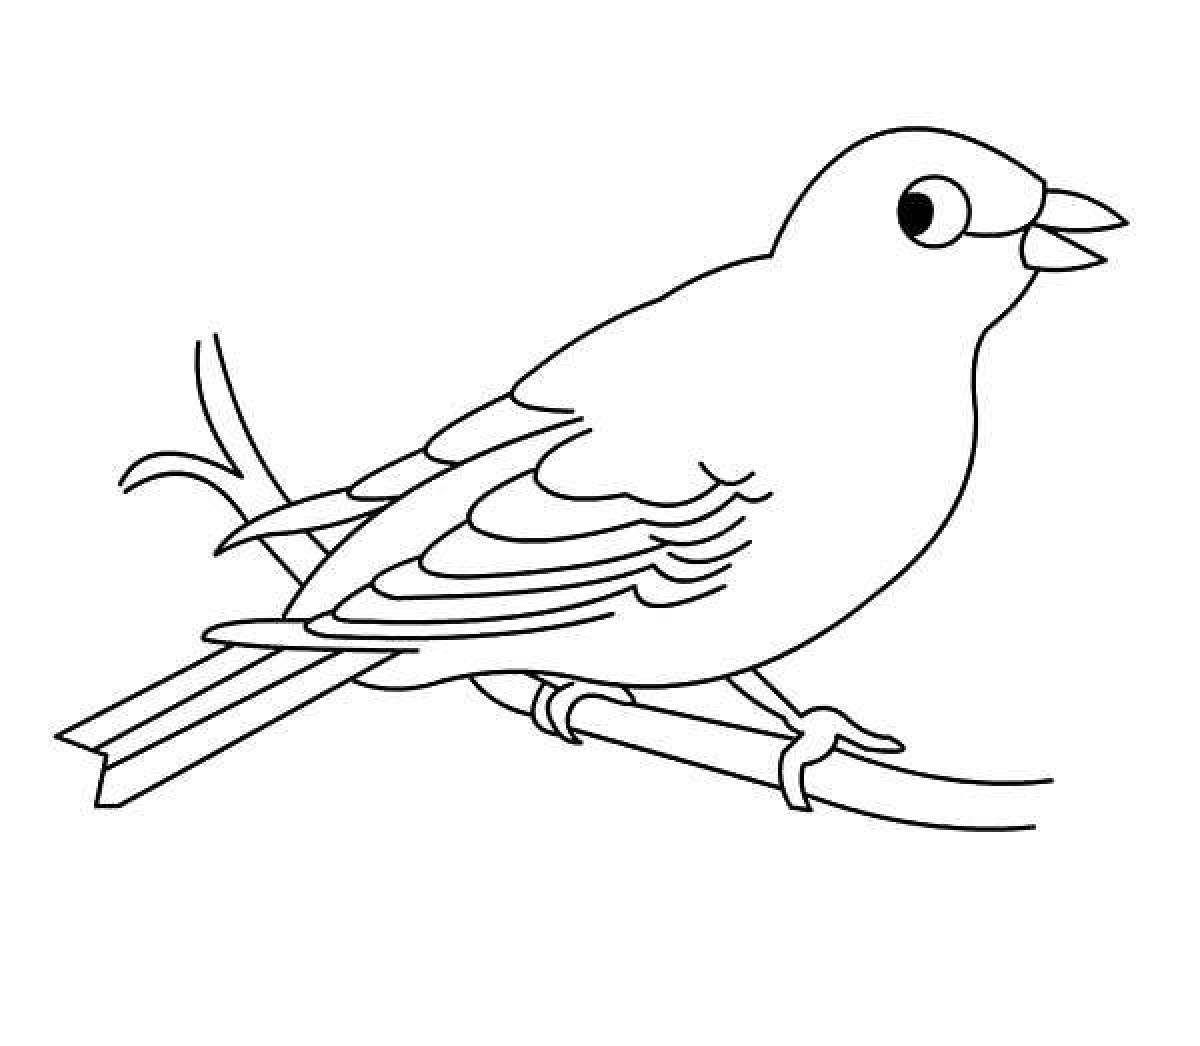 Crazy canary coloring book